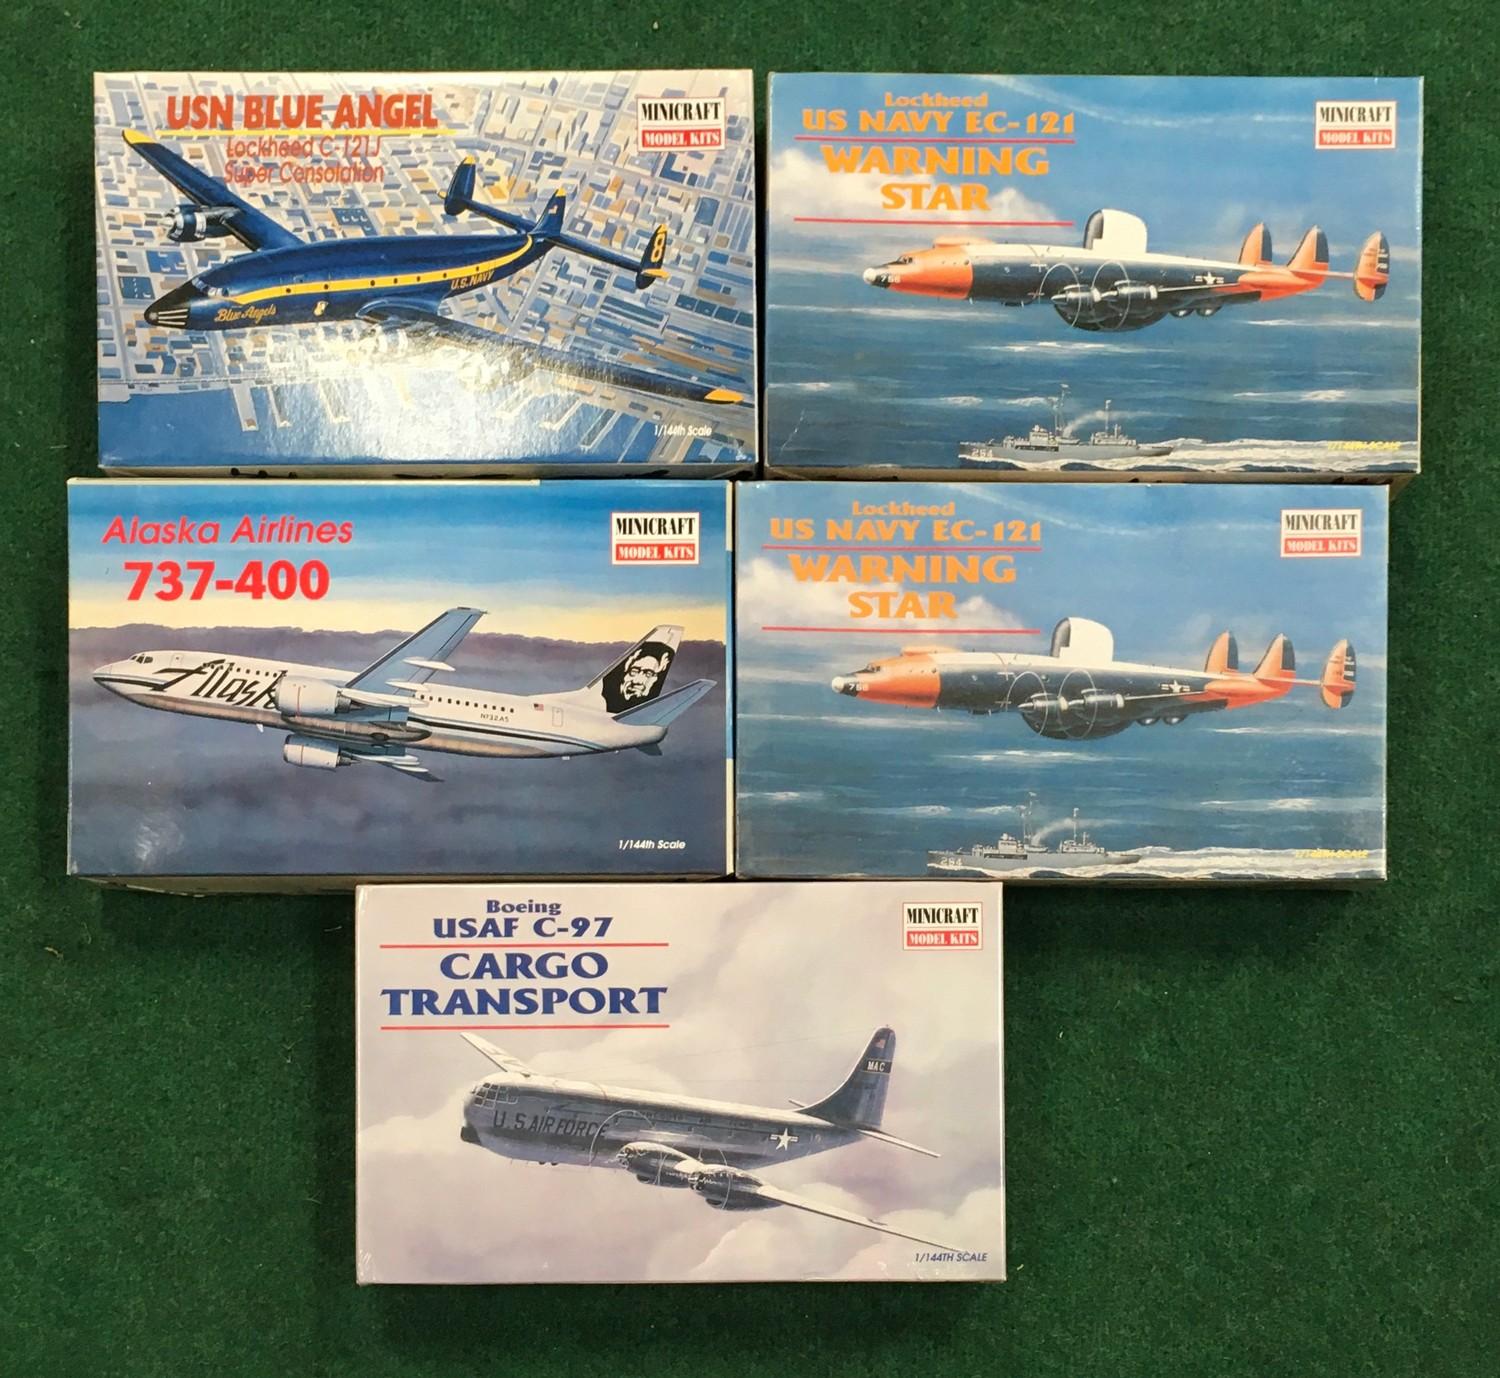 Five model kits by Minicraft to include USN Blue Angel, US Navy EC-121 Warning Star and others.